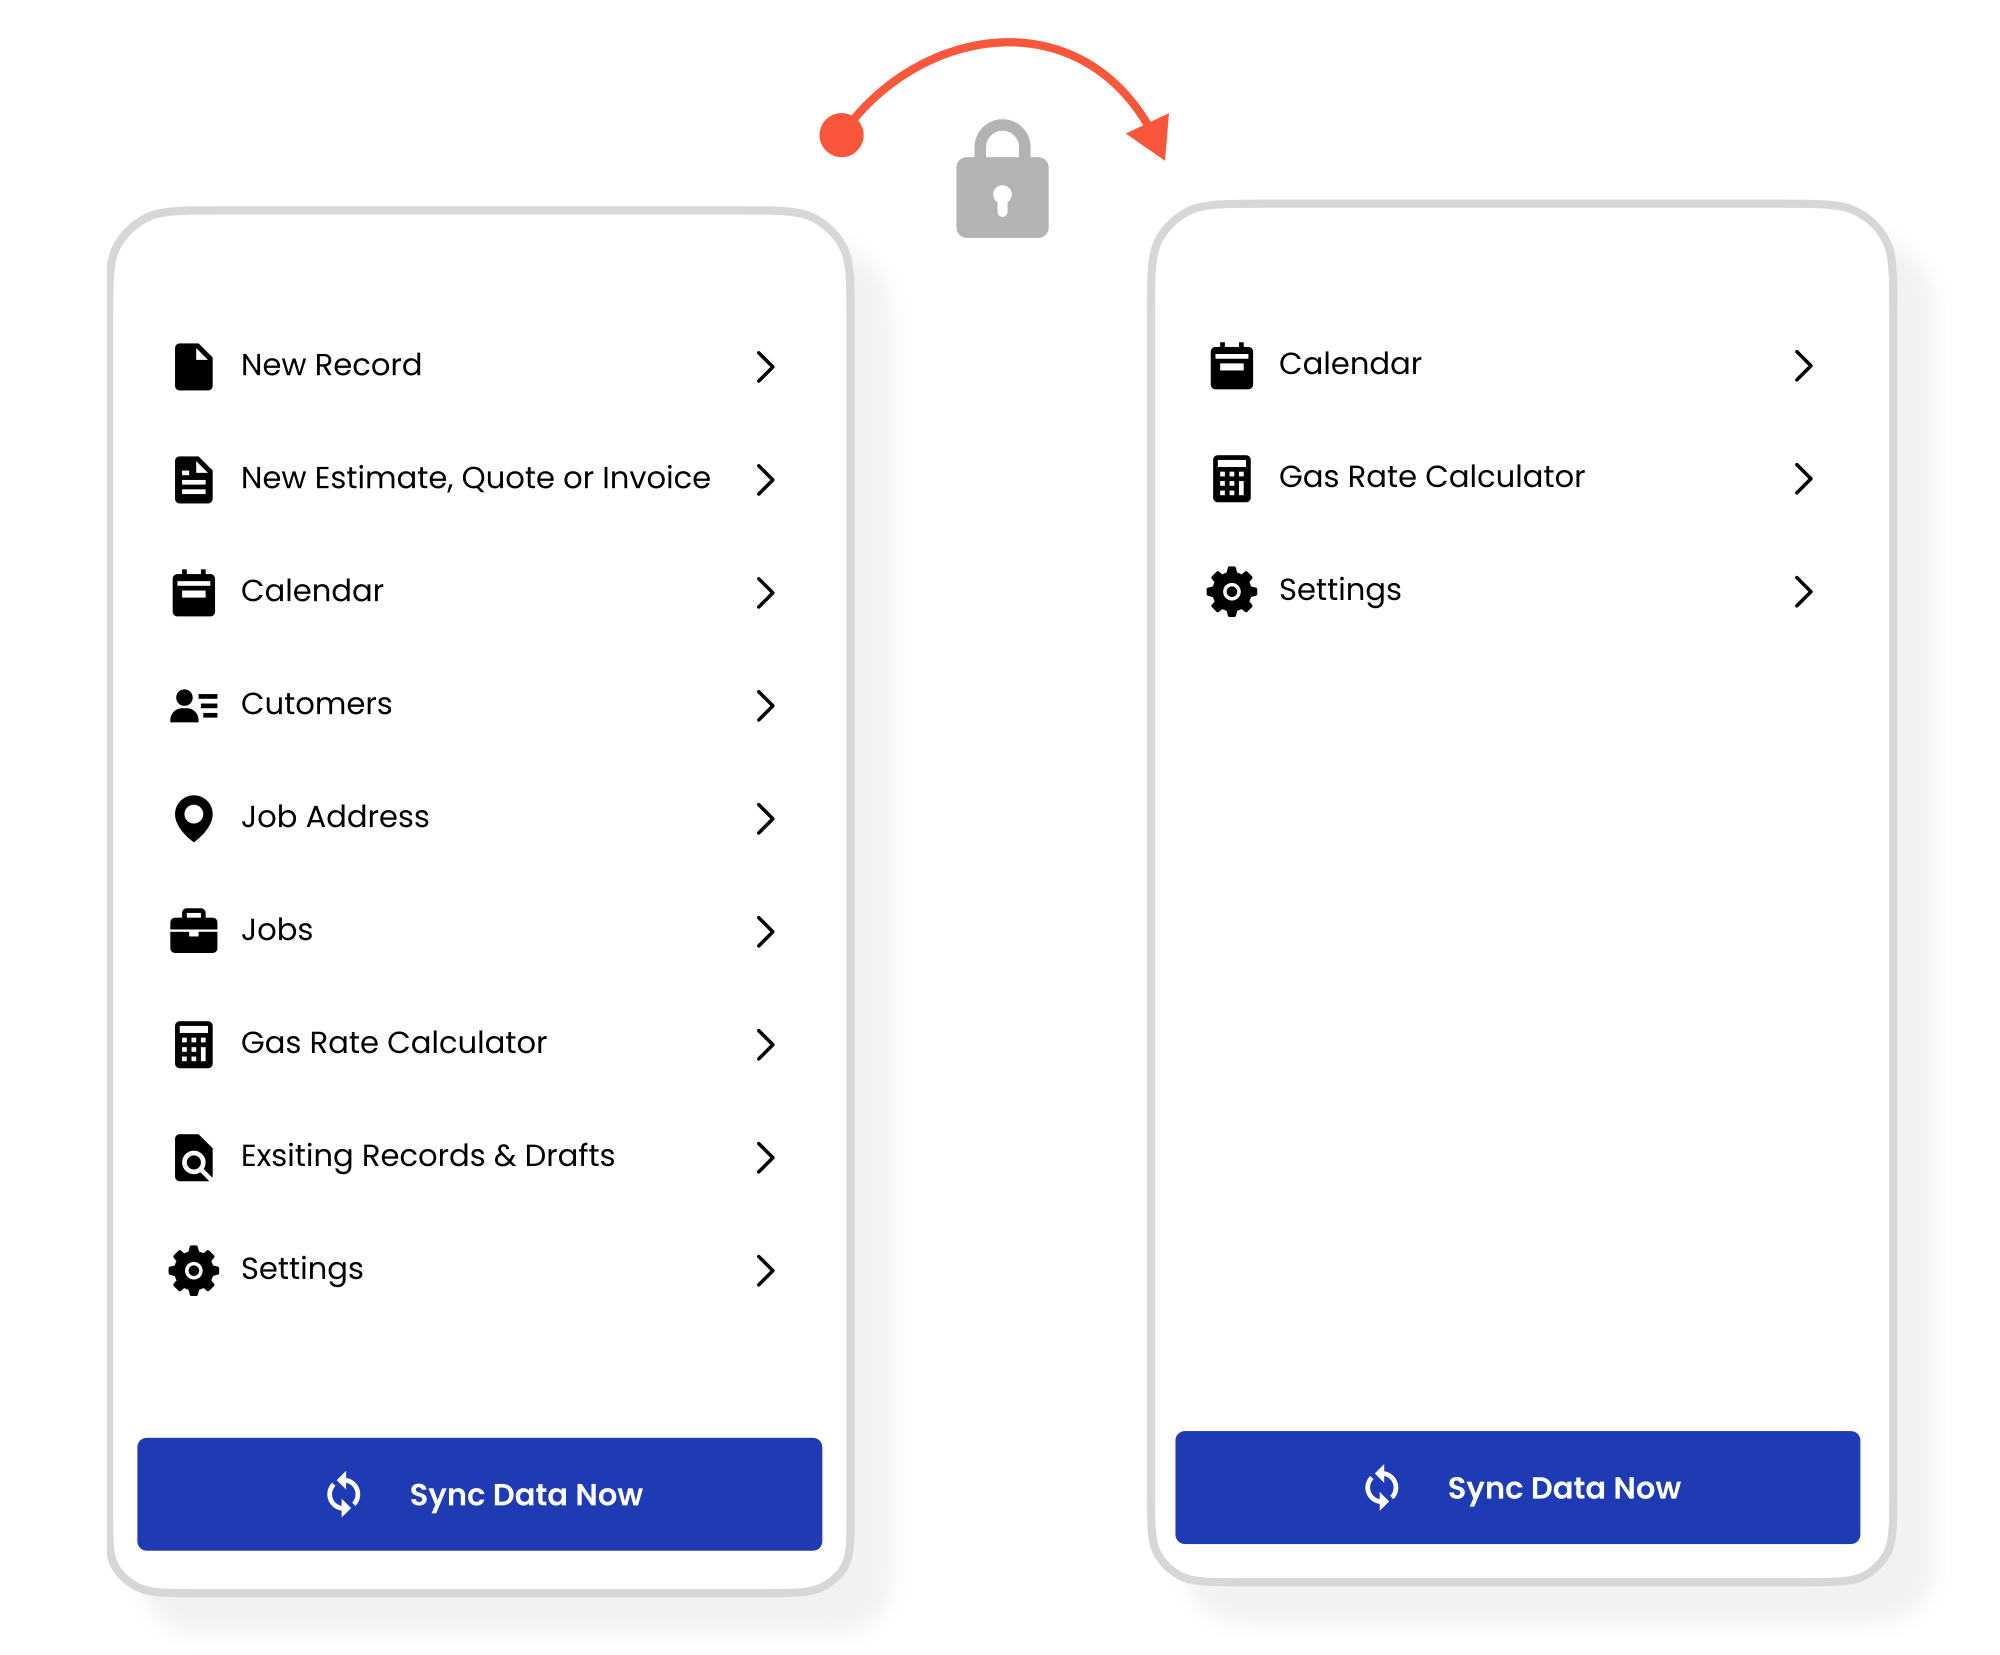 Add user permissions to control who sees what